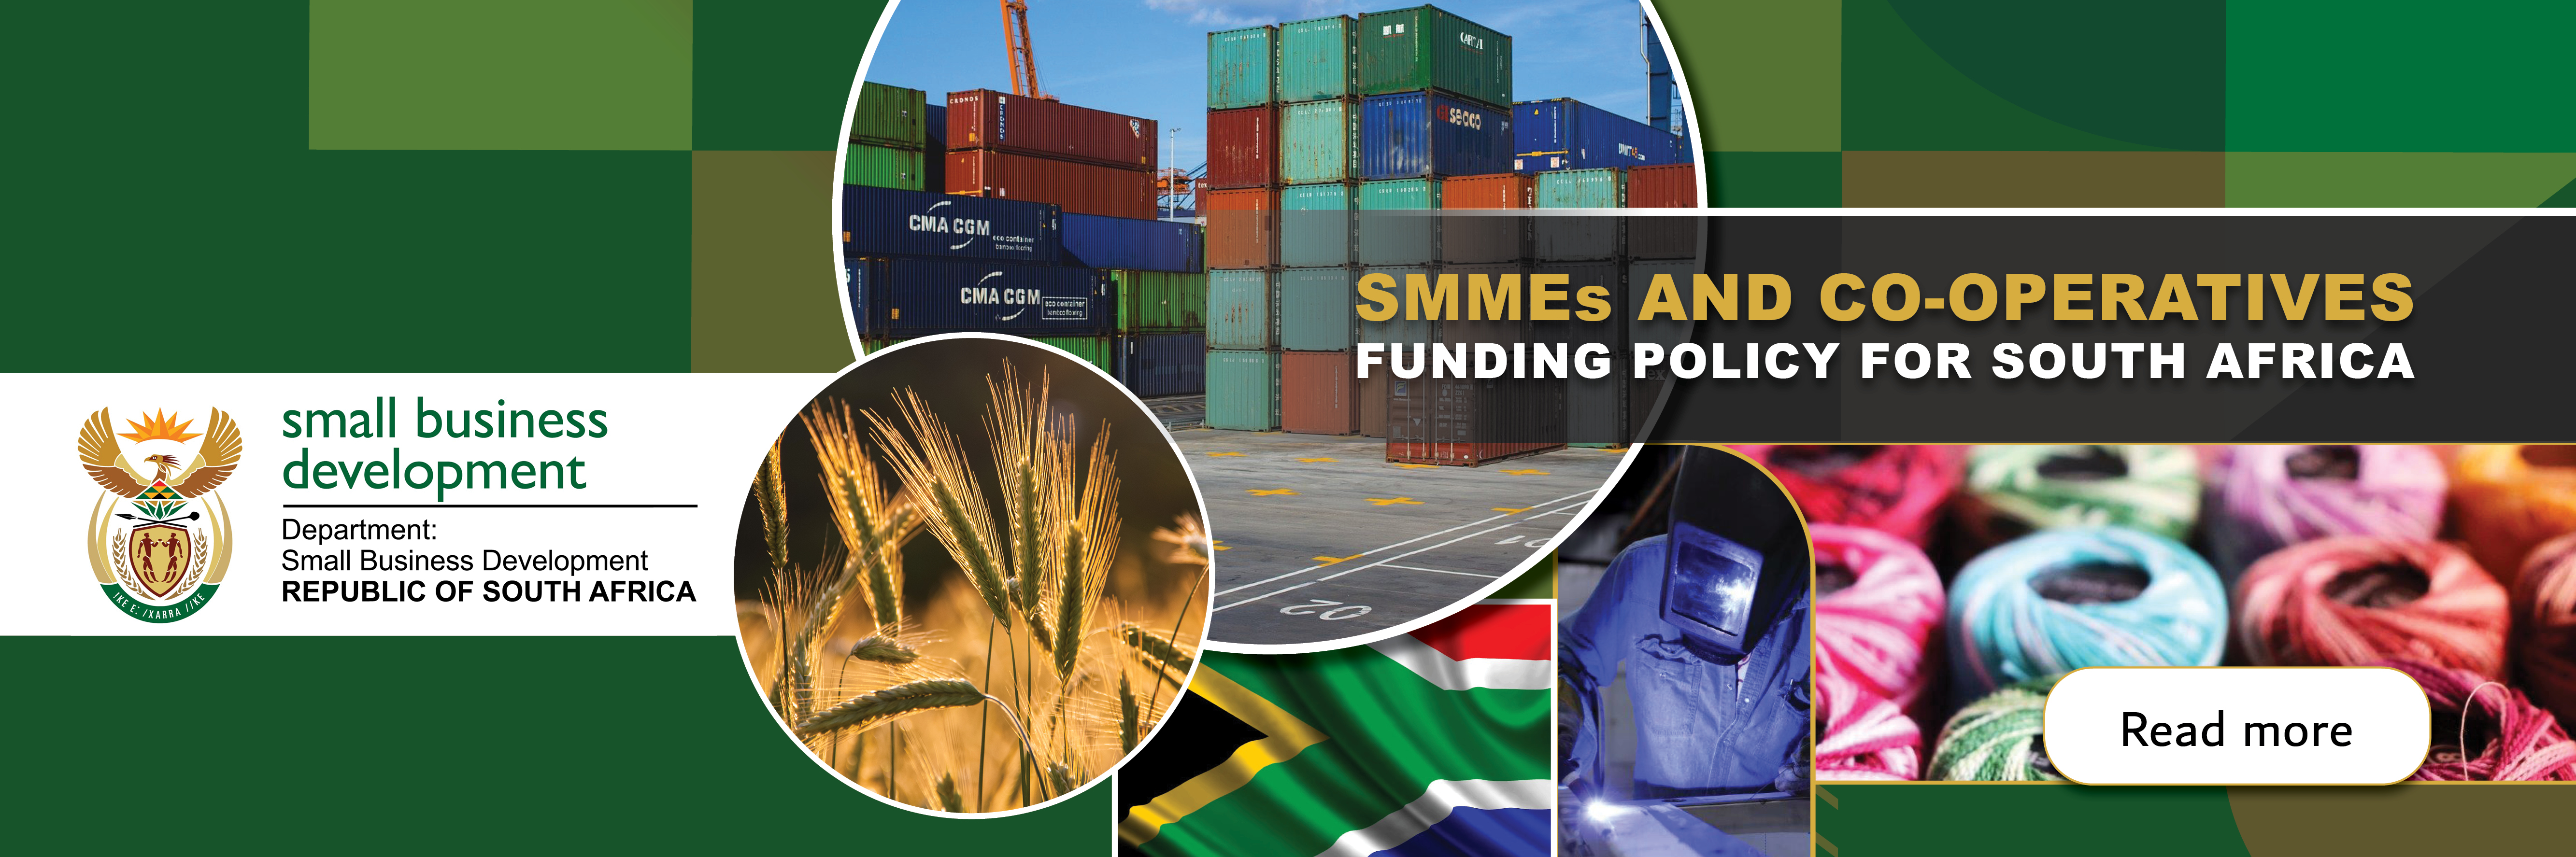 SMMEs AND CO-OPERATIVES FUNDING POLICY FOR SOUTH AFRICA